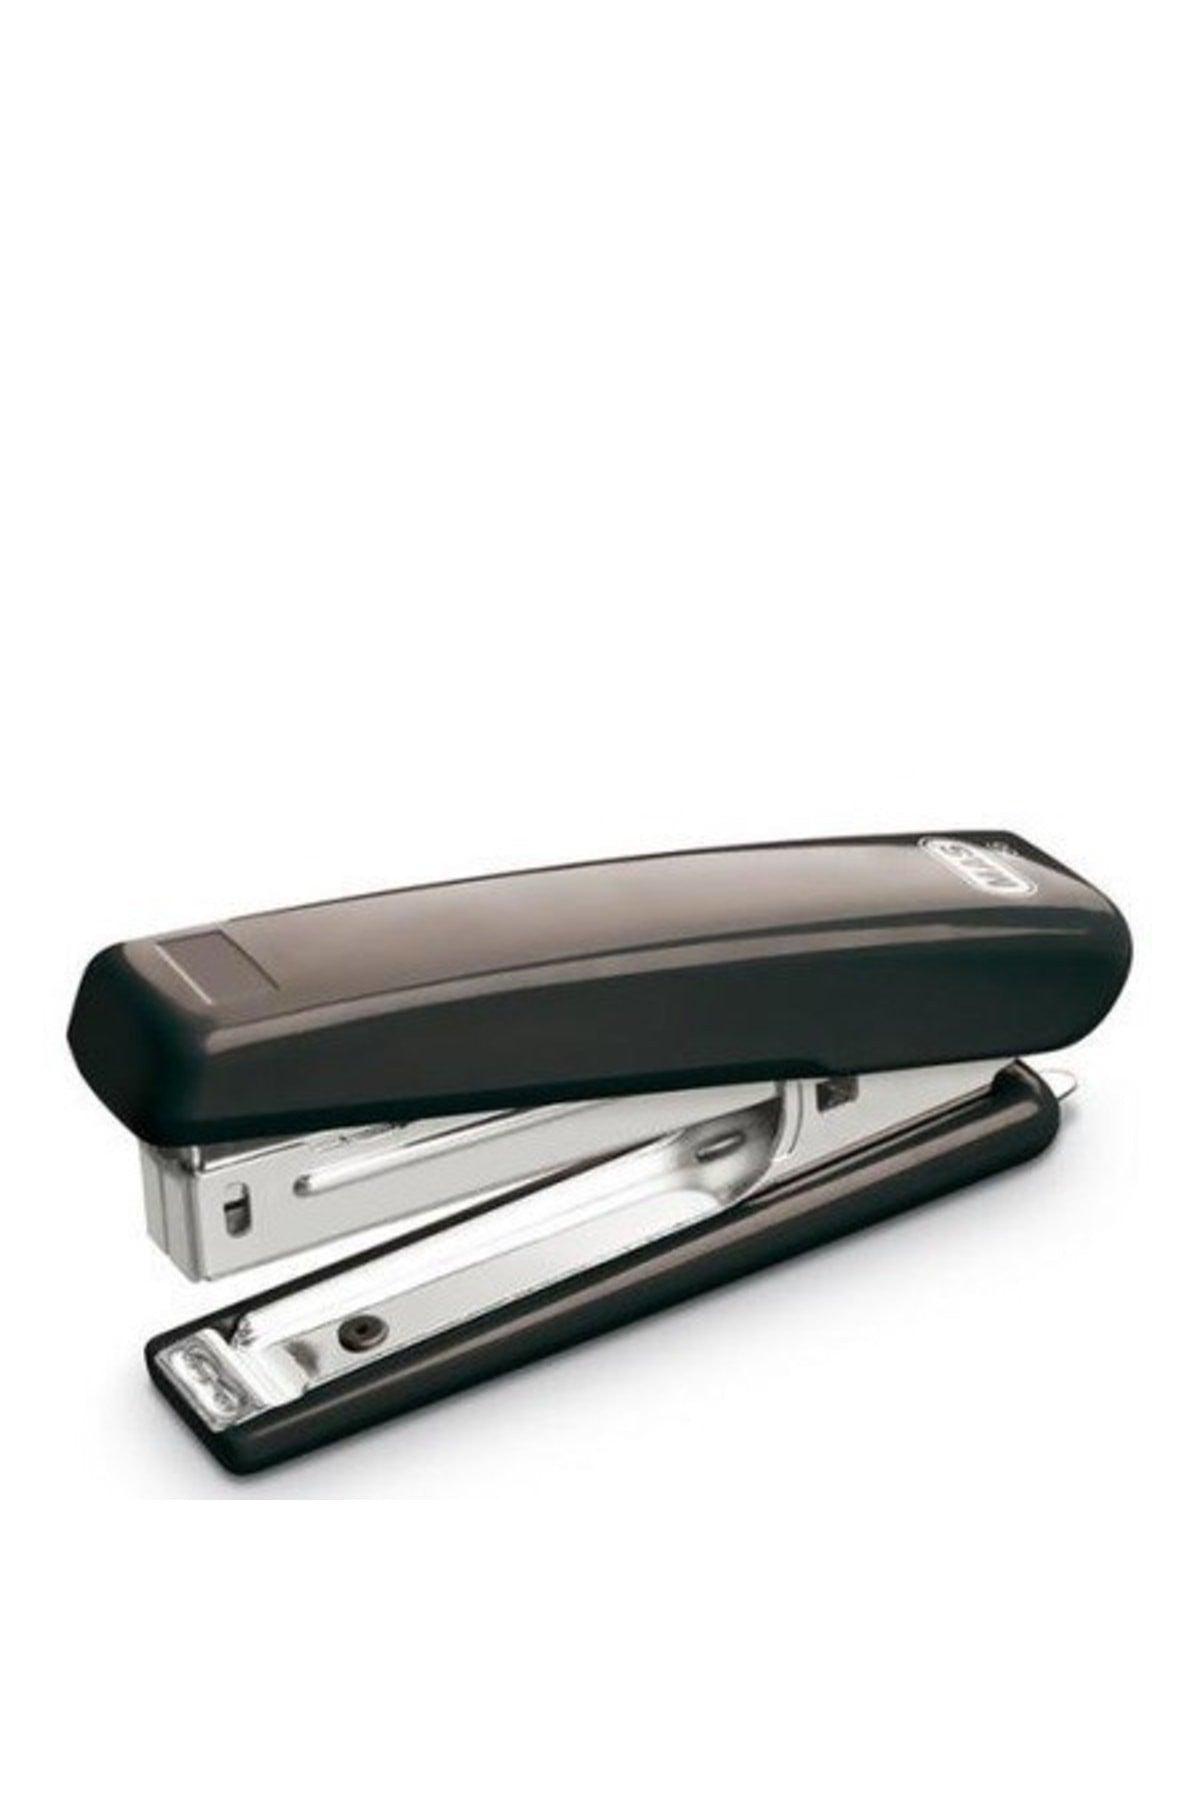 Black Stapler And Punch Set (20 Pages)